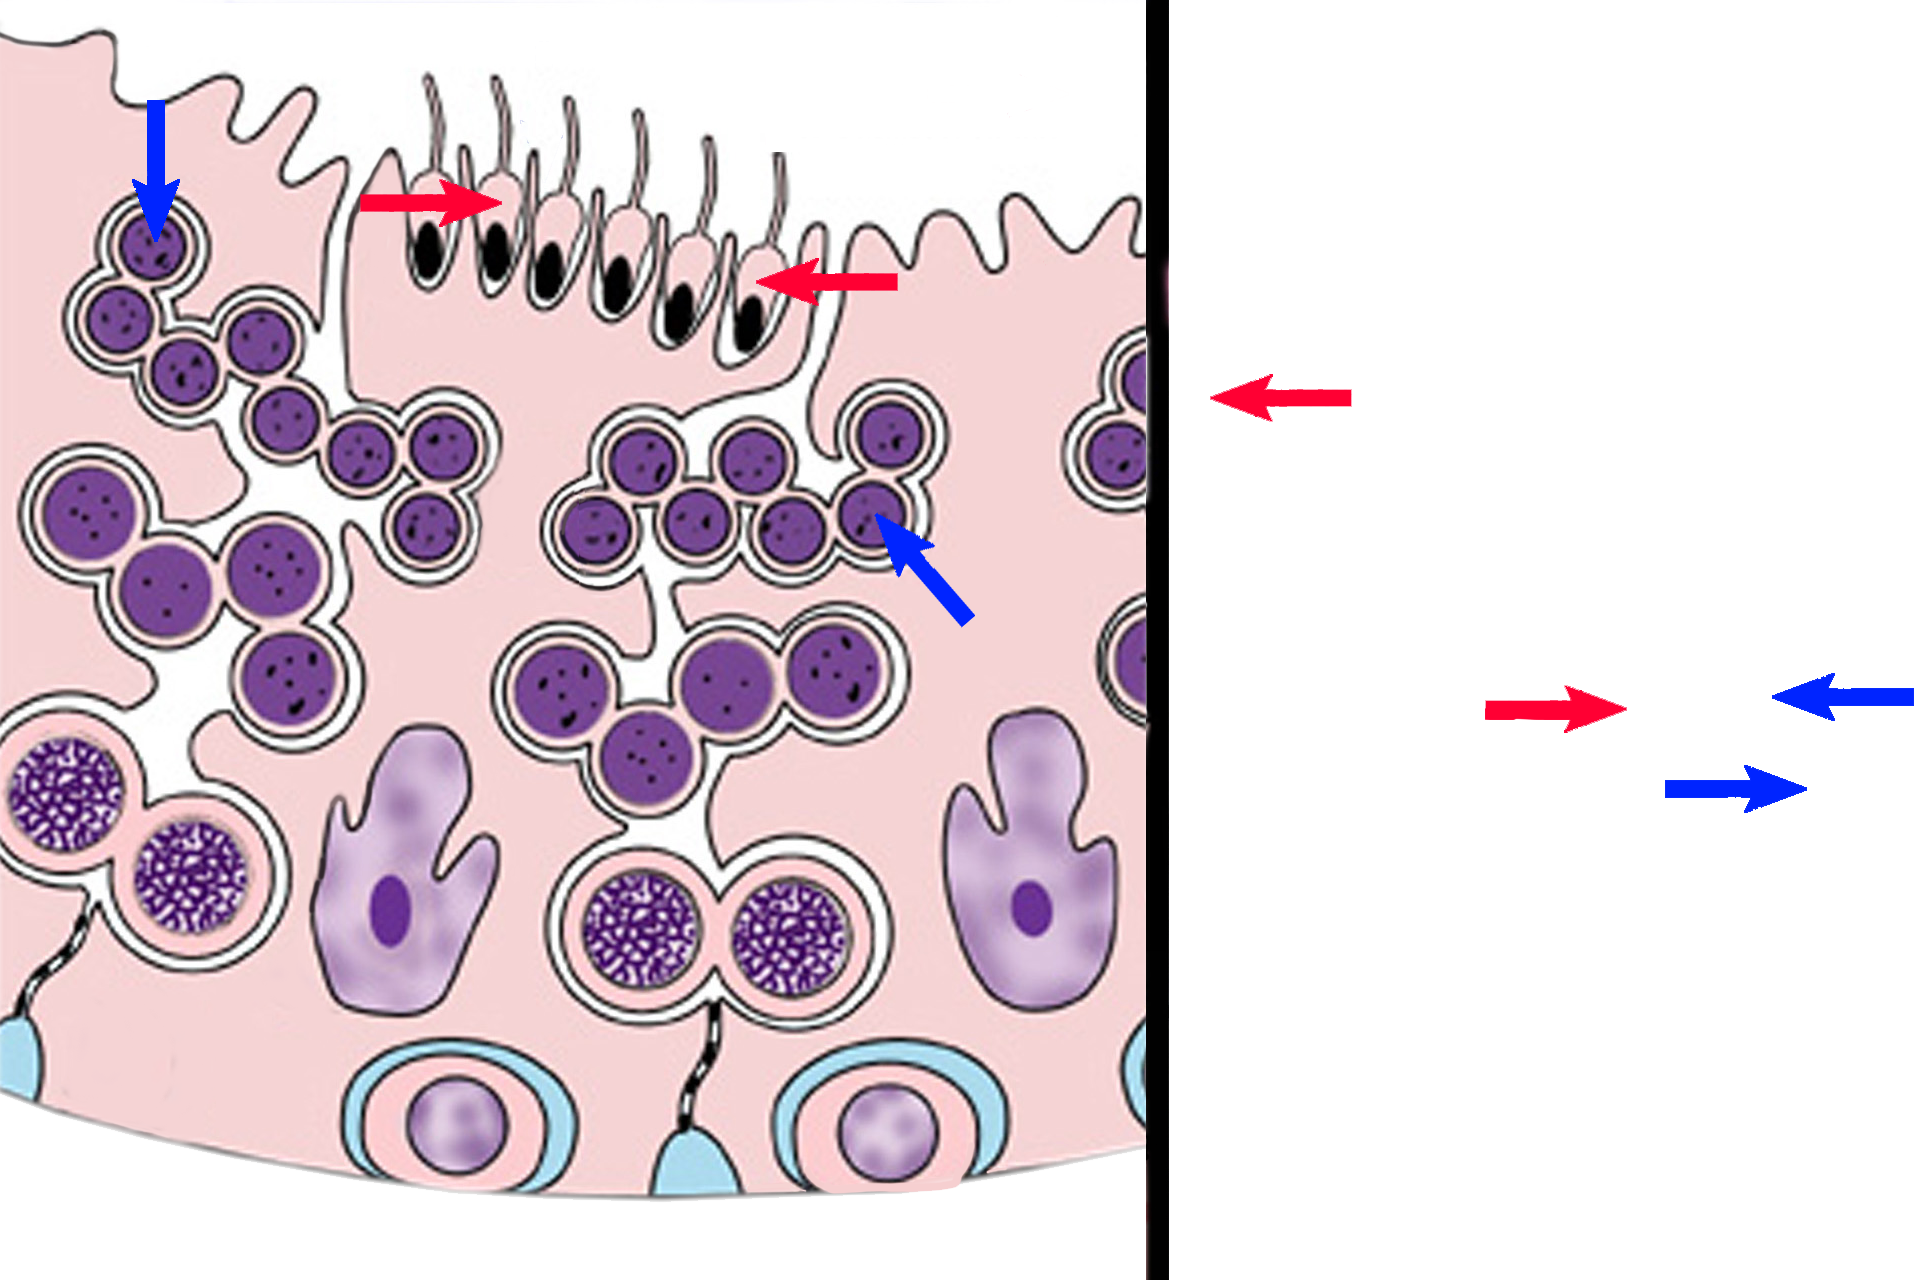  - Spermatids > <p>Spermatids, haploid cells formed by the 2nd meiotic division of secondary spermatocytes, lie adjacent to the lumen. Nuclei of the first spermatids formed are about 2/3 the size of spermatogonia nuclei. Spermatids do not divide but undergo cytodifferentiation. They transform from spherical cells (early spermatids, blue arrows), to the sleek, tadpole-shape of late spermatids (red arrows).</p>
